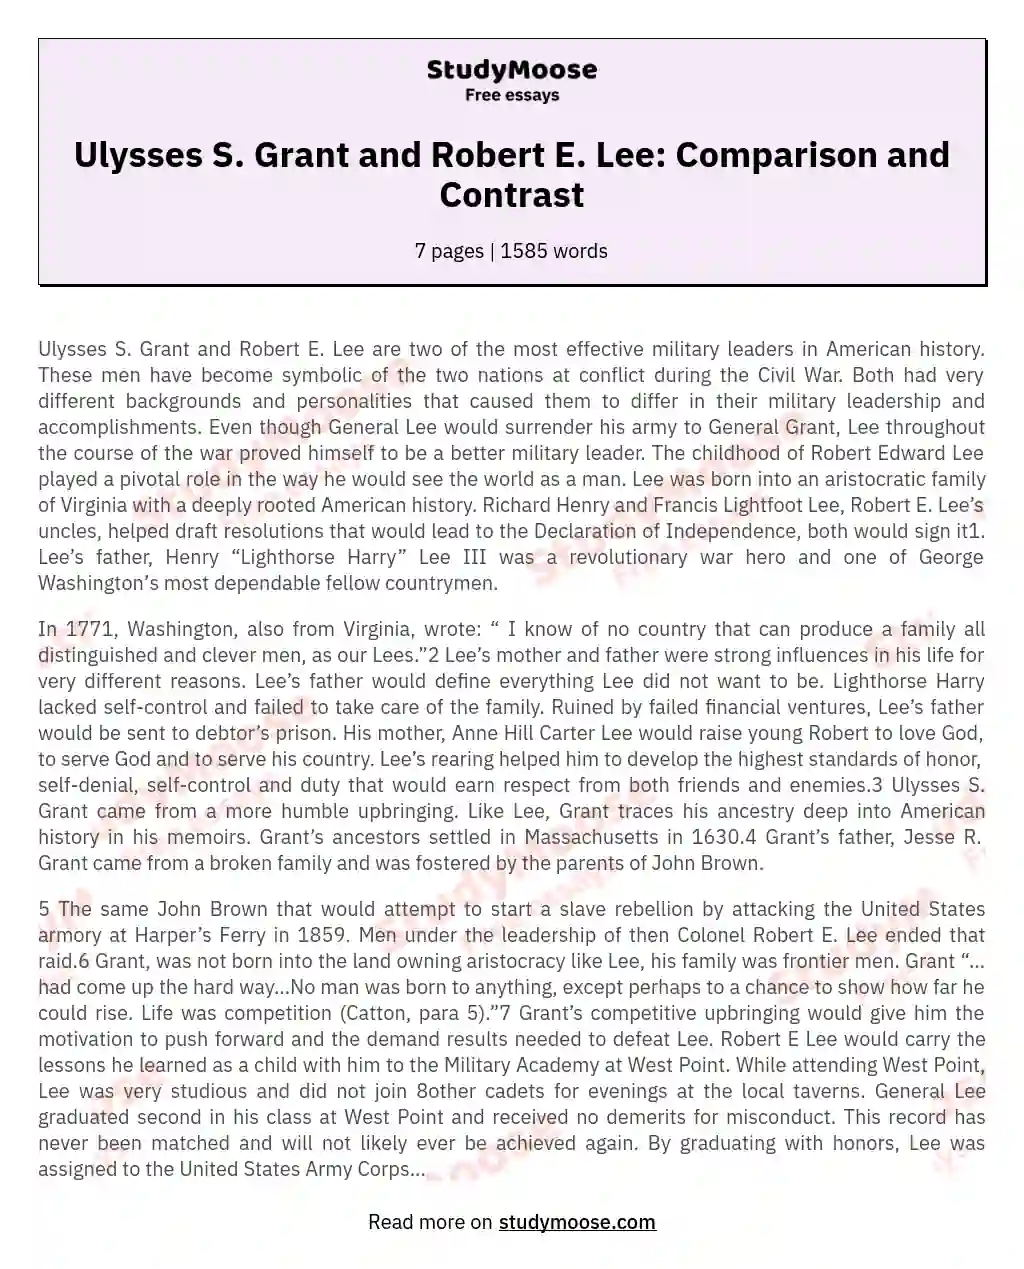 Ulysses S. Grant and Robert E. Lee: Comparison and Contrast